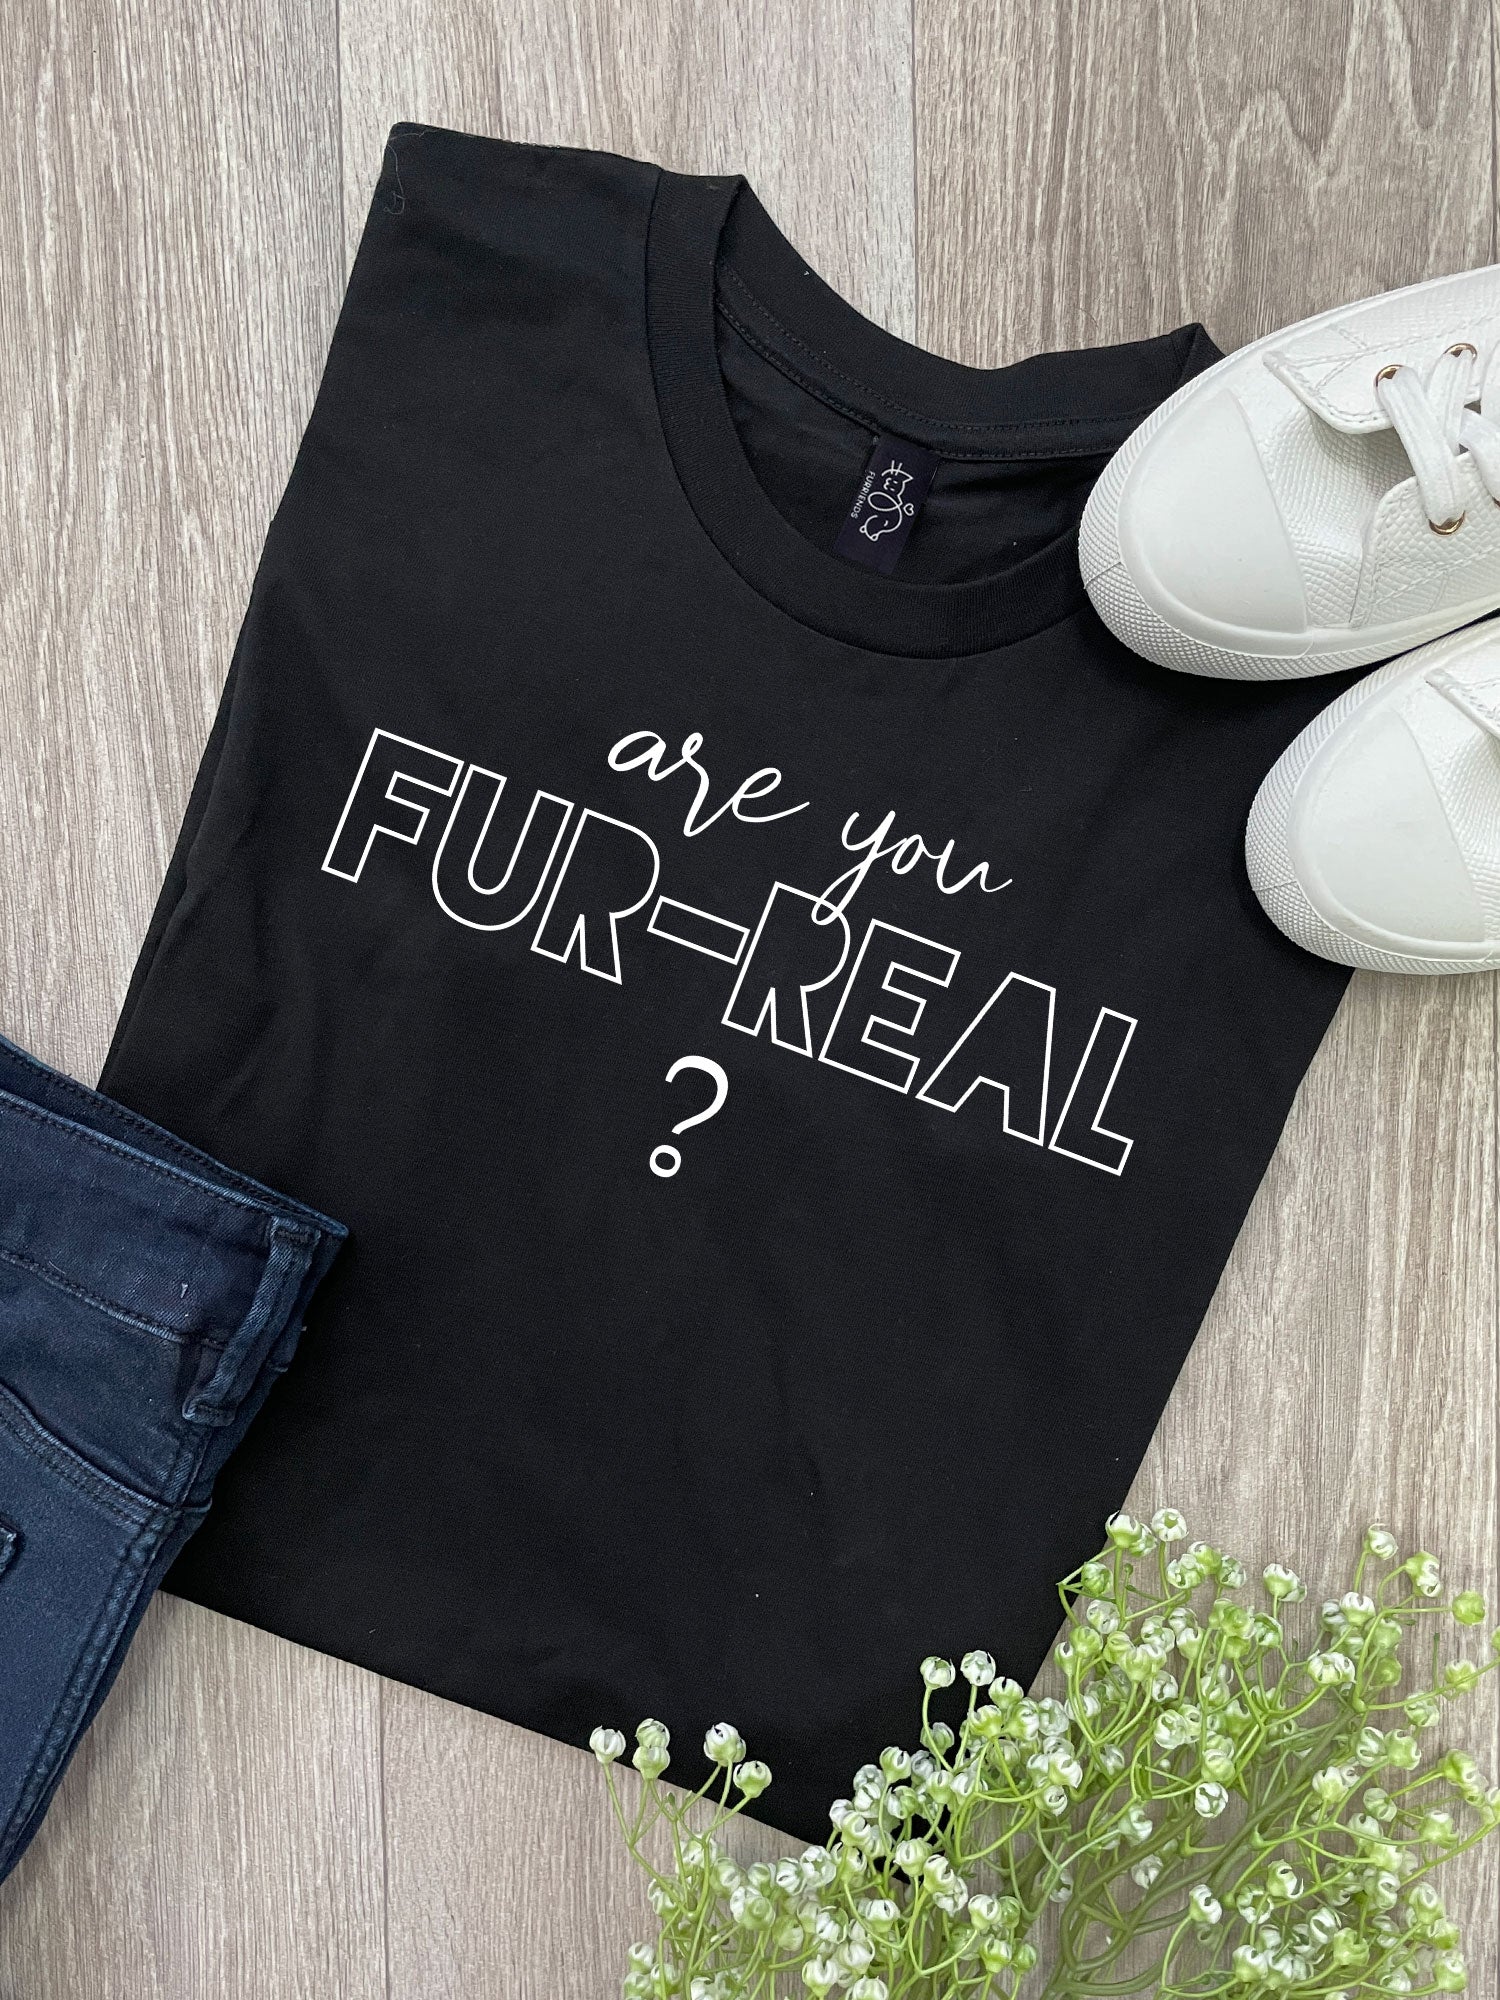 Are You Fur-Real?